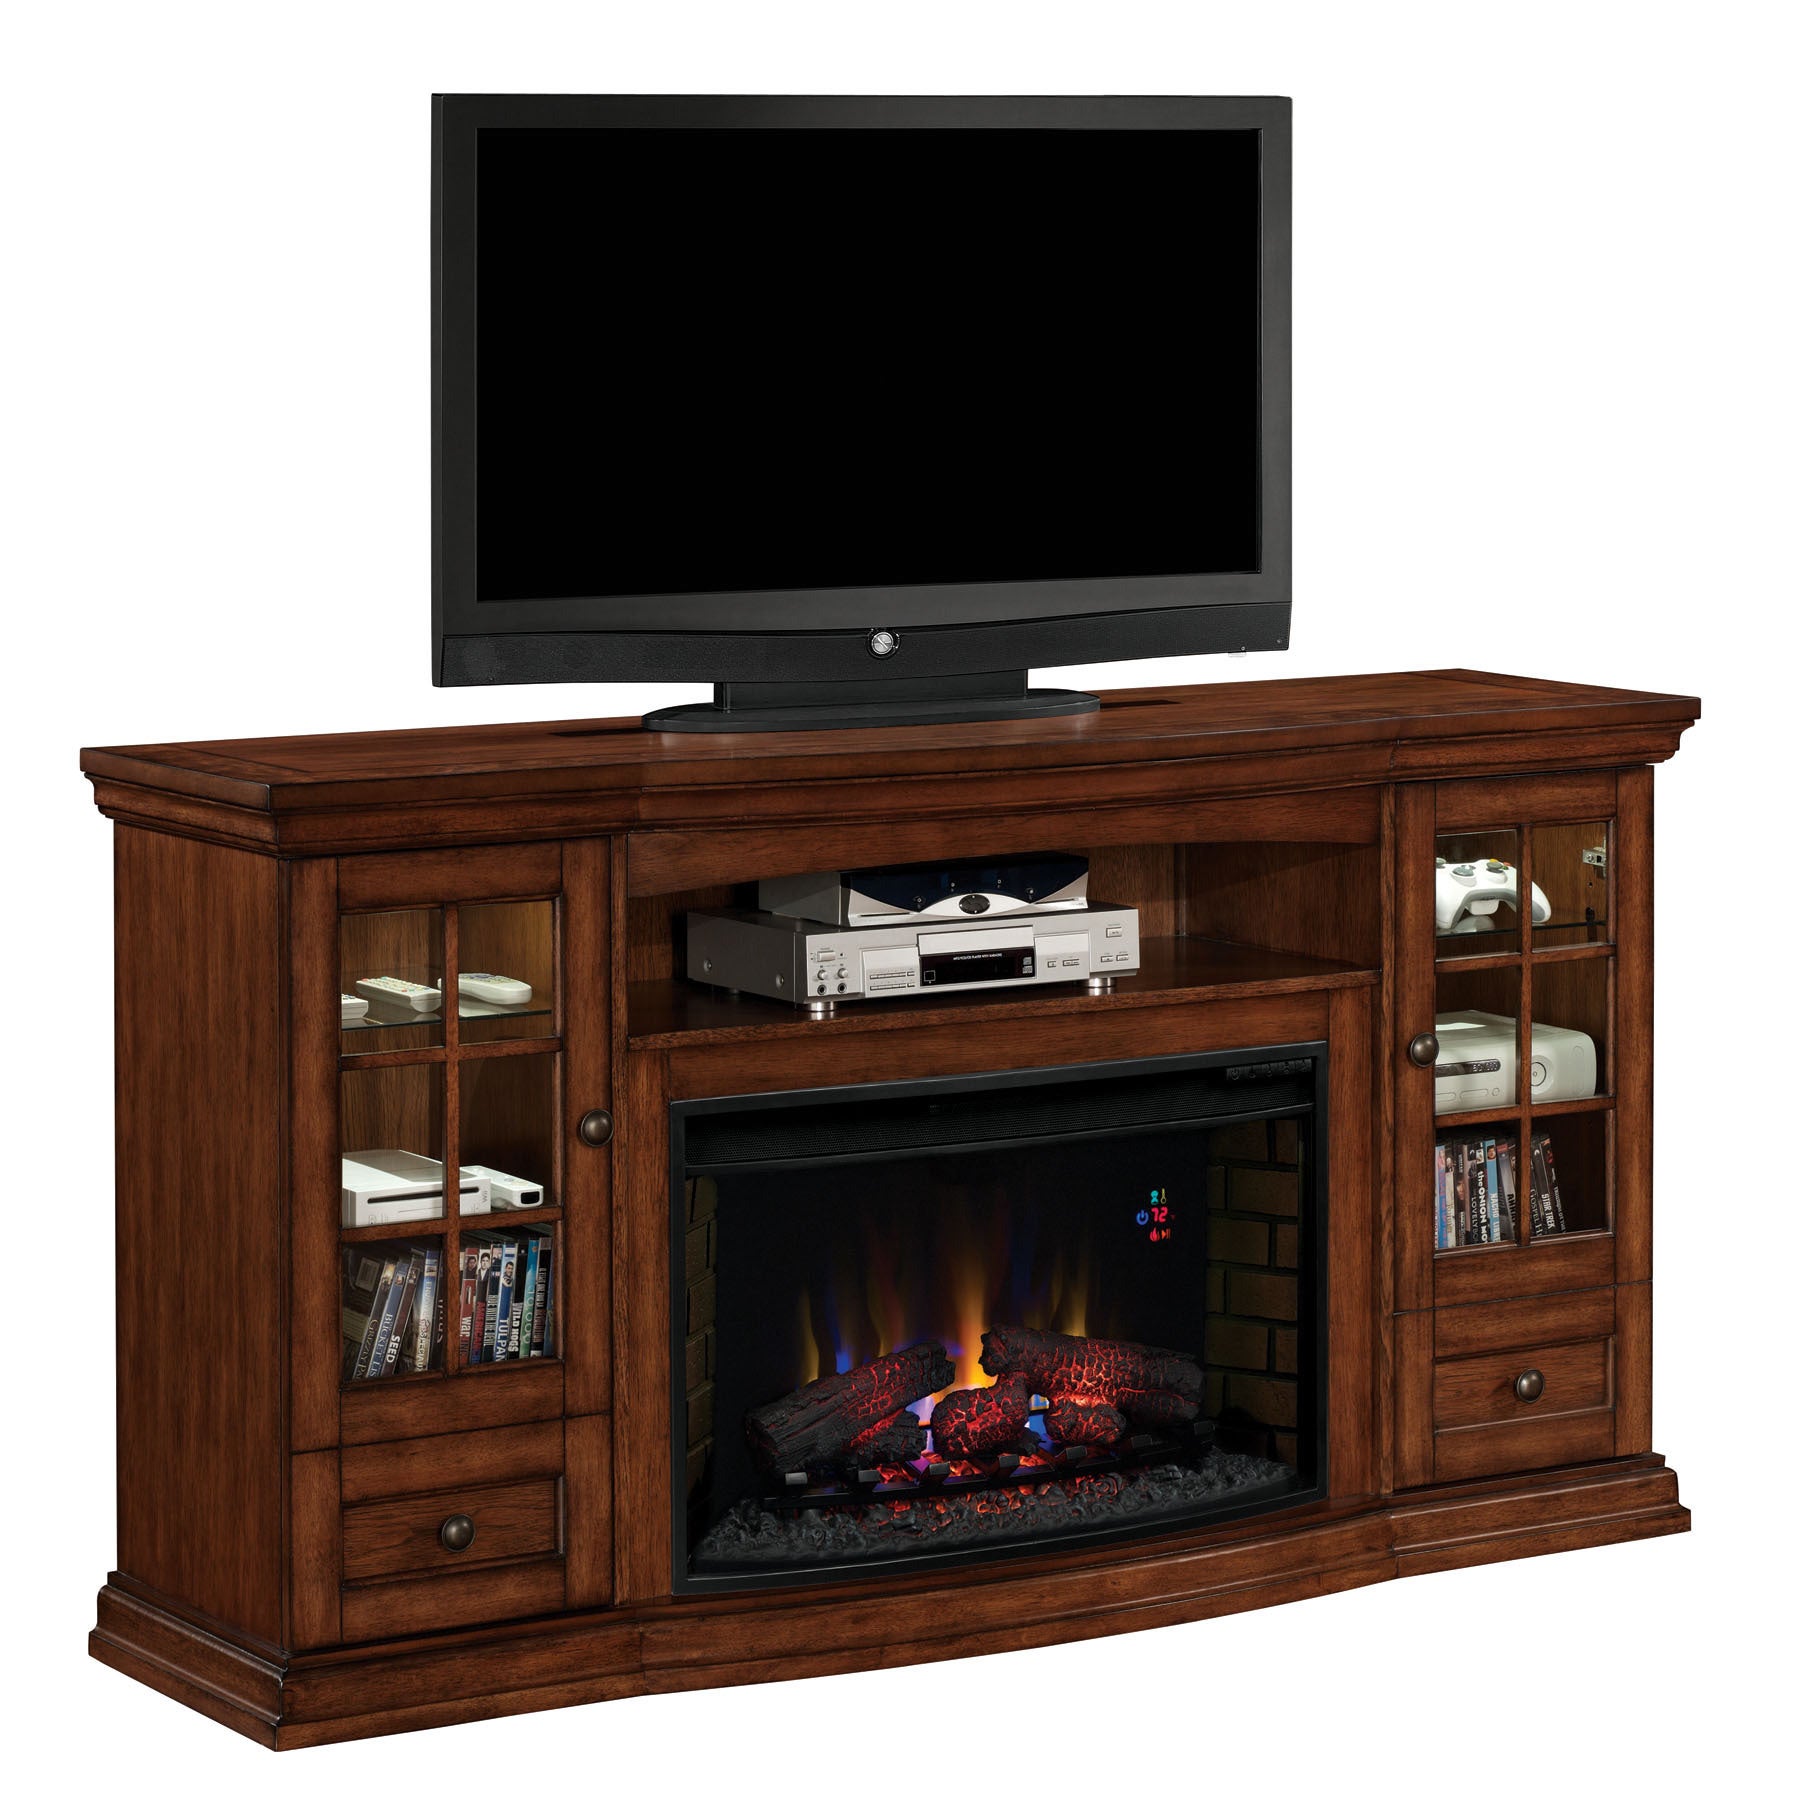 Overstock Fireplace Tv Stand Inspirational Seagate Tv Stand with 32 Inch Curved Infrared Quartz Fireplace Pecan